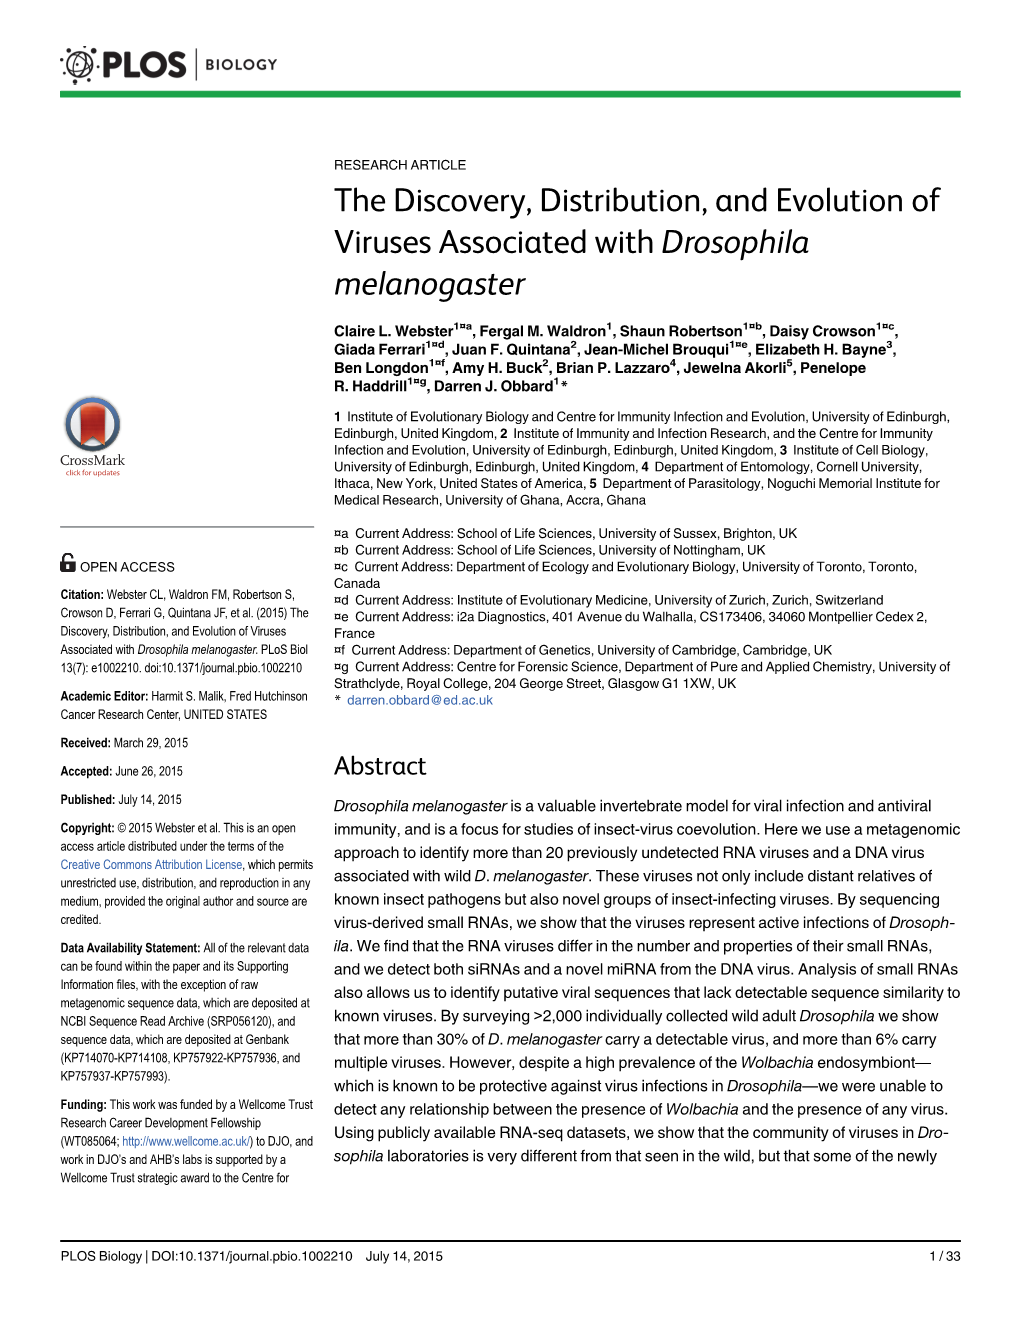 The Discovery, Distribution, and Evolution of Viruses Associated with Drosophila Melanogaster